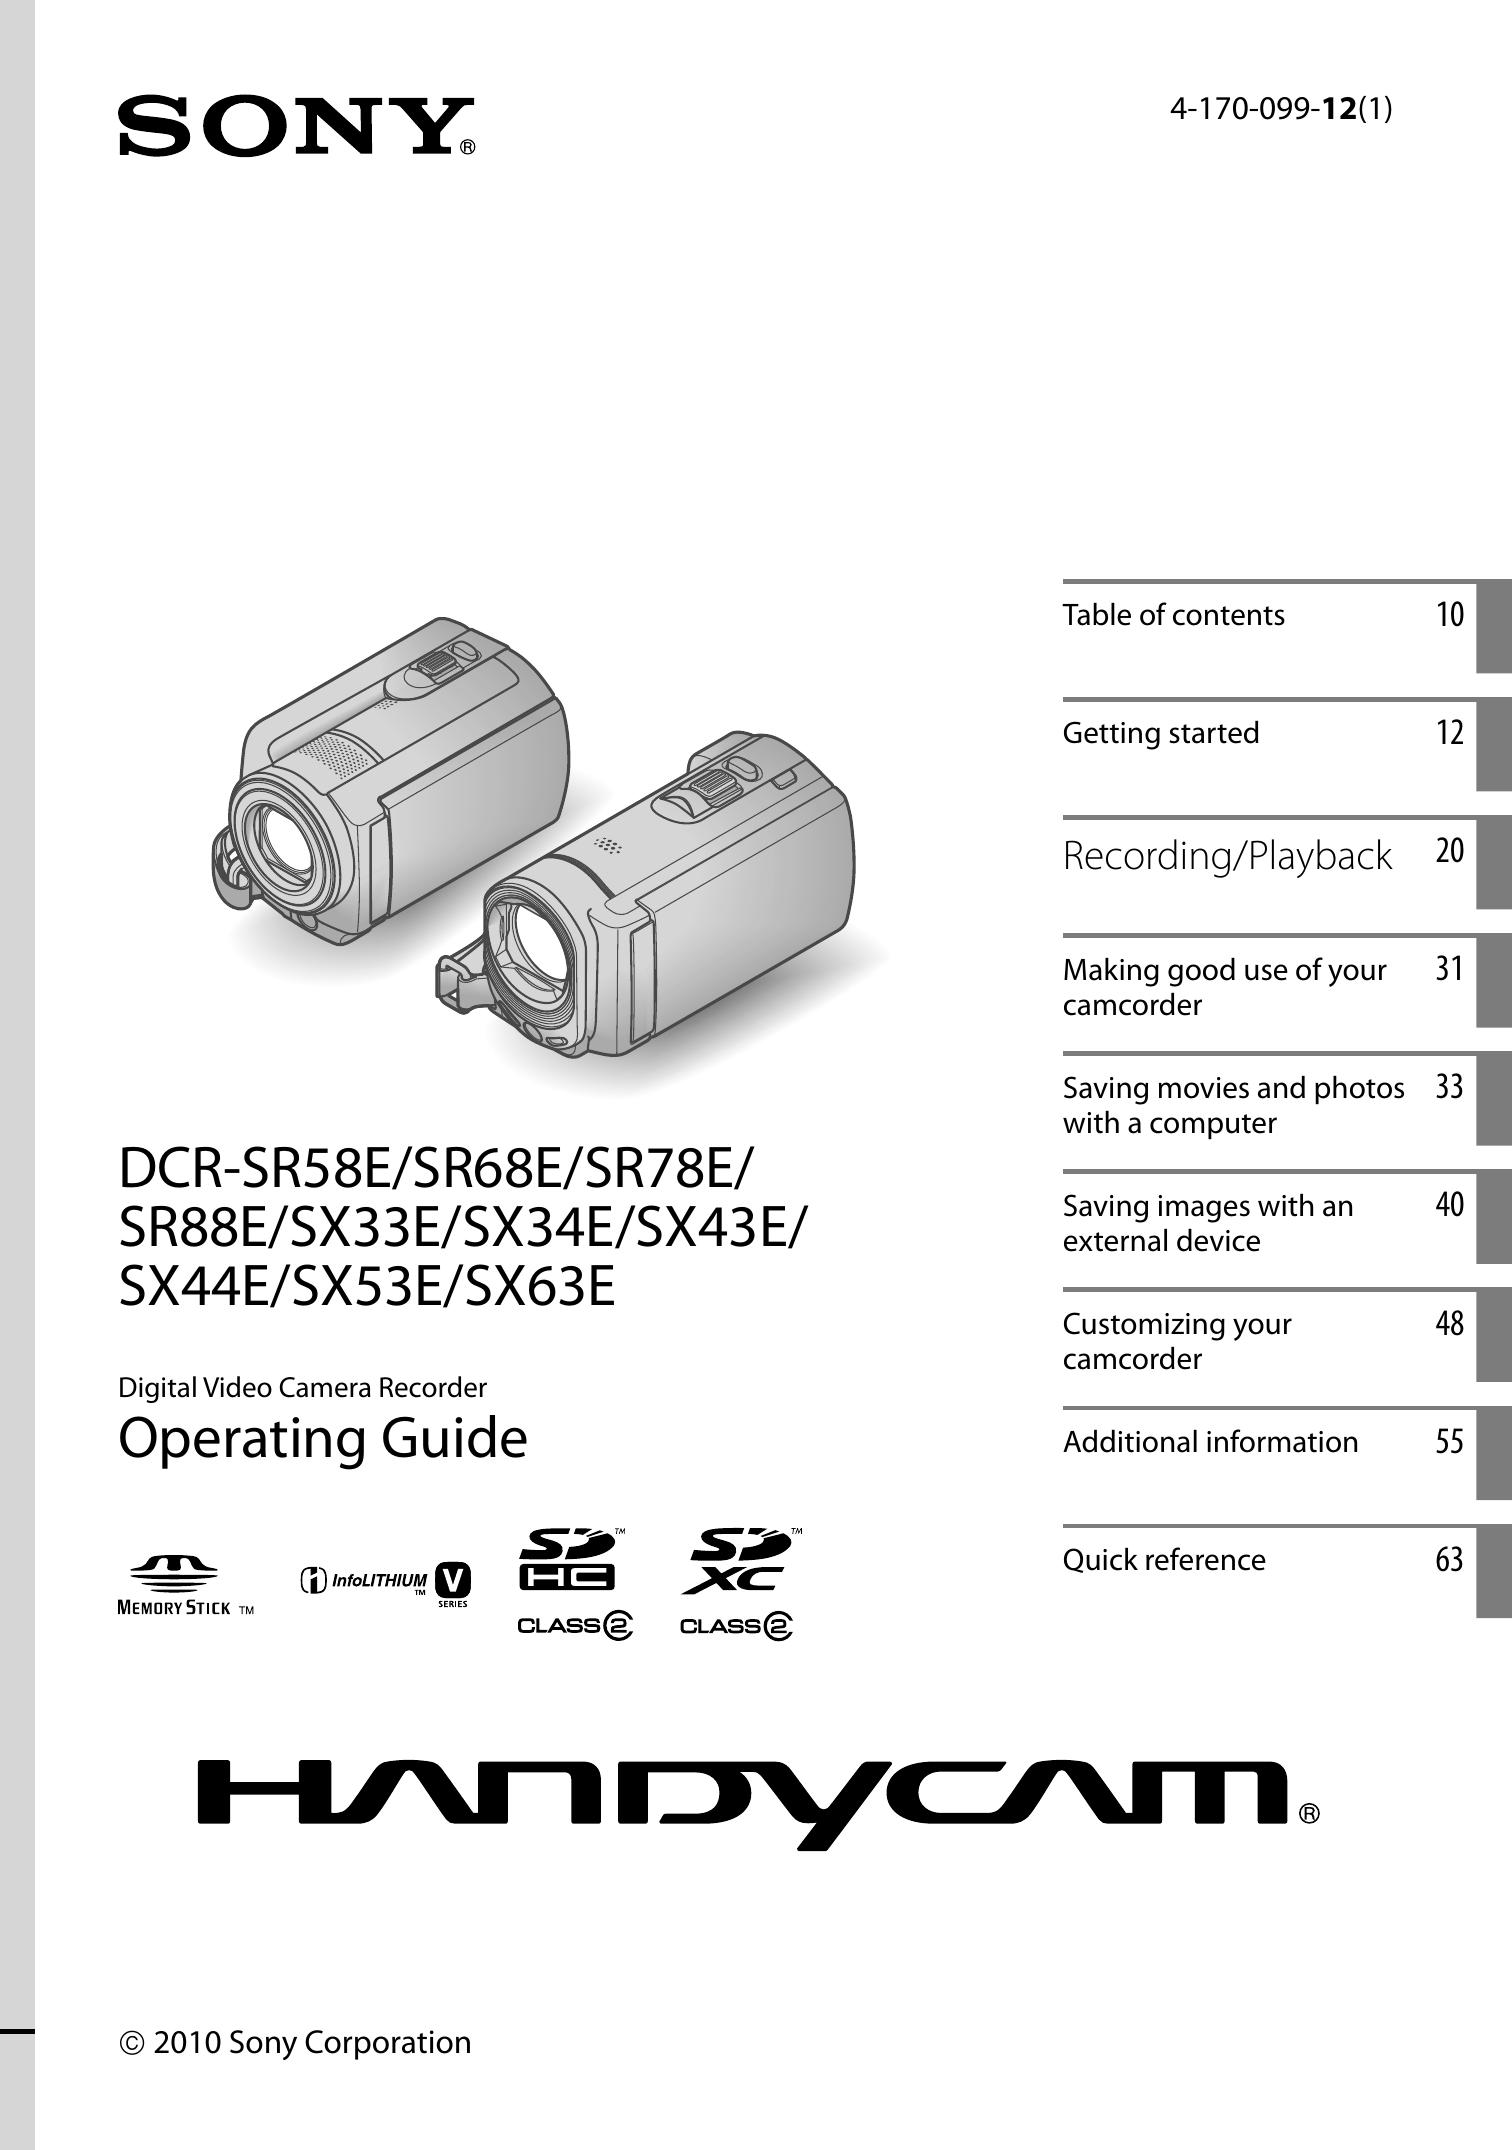 Sony 4-170-099-12(1) Camcorder User Manual